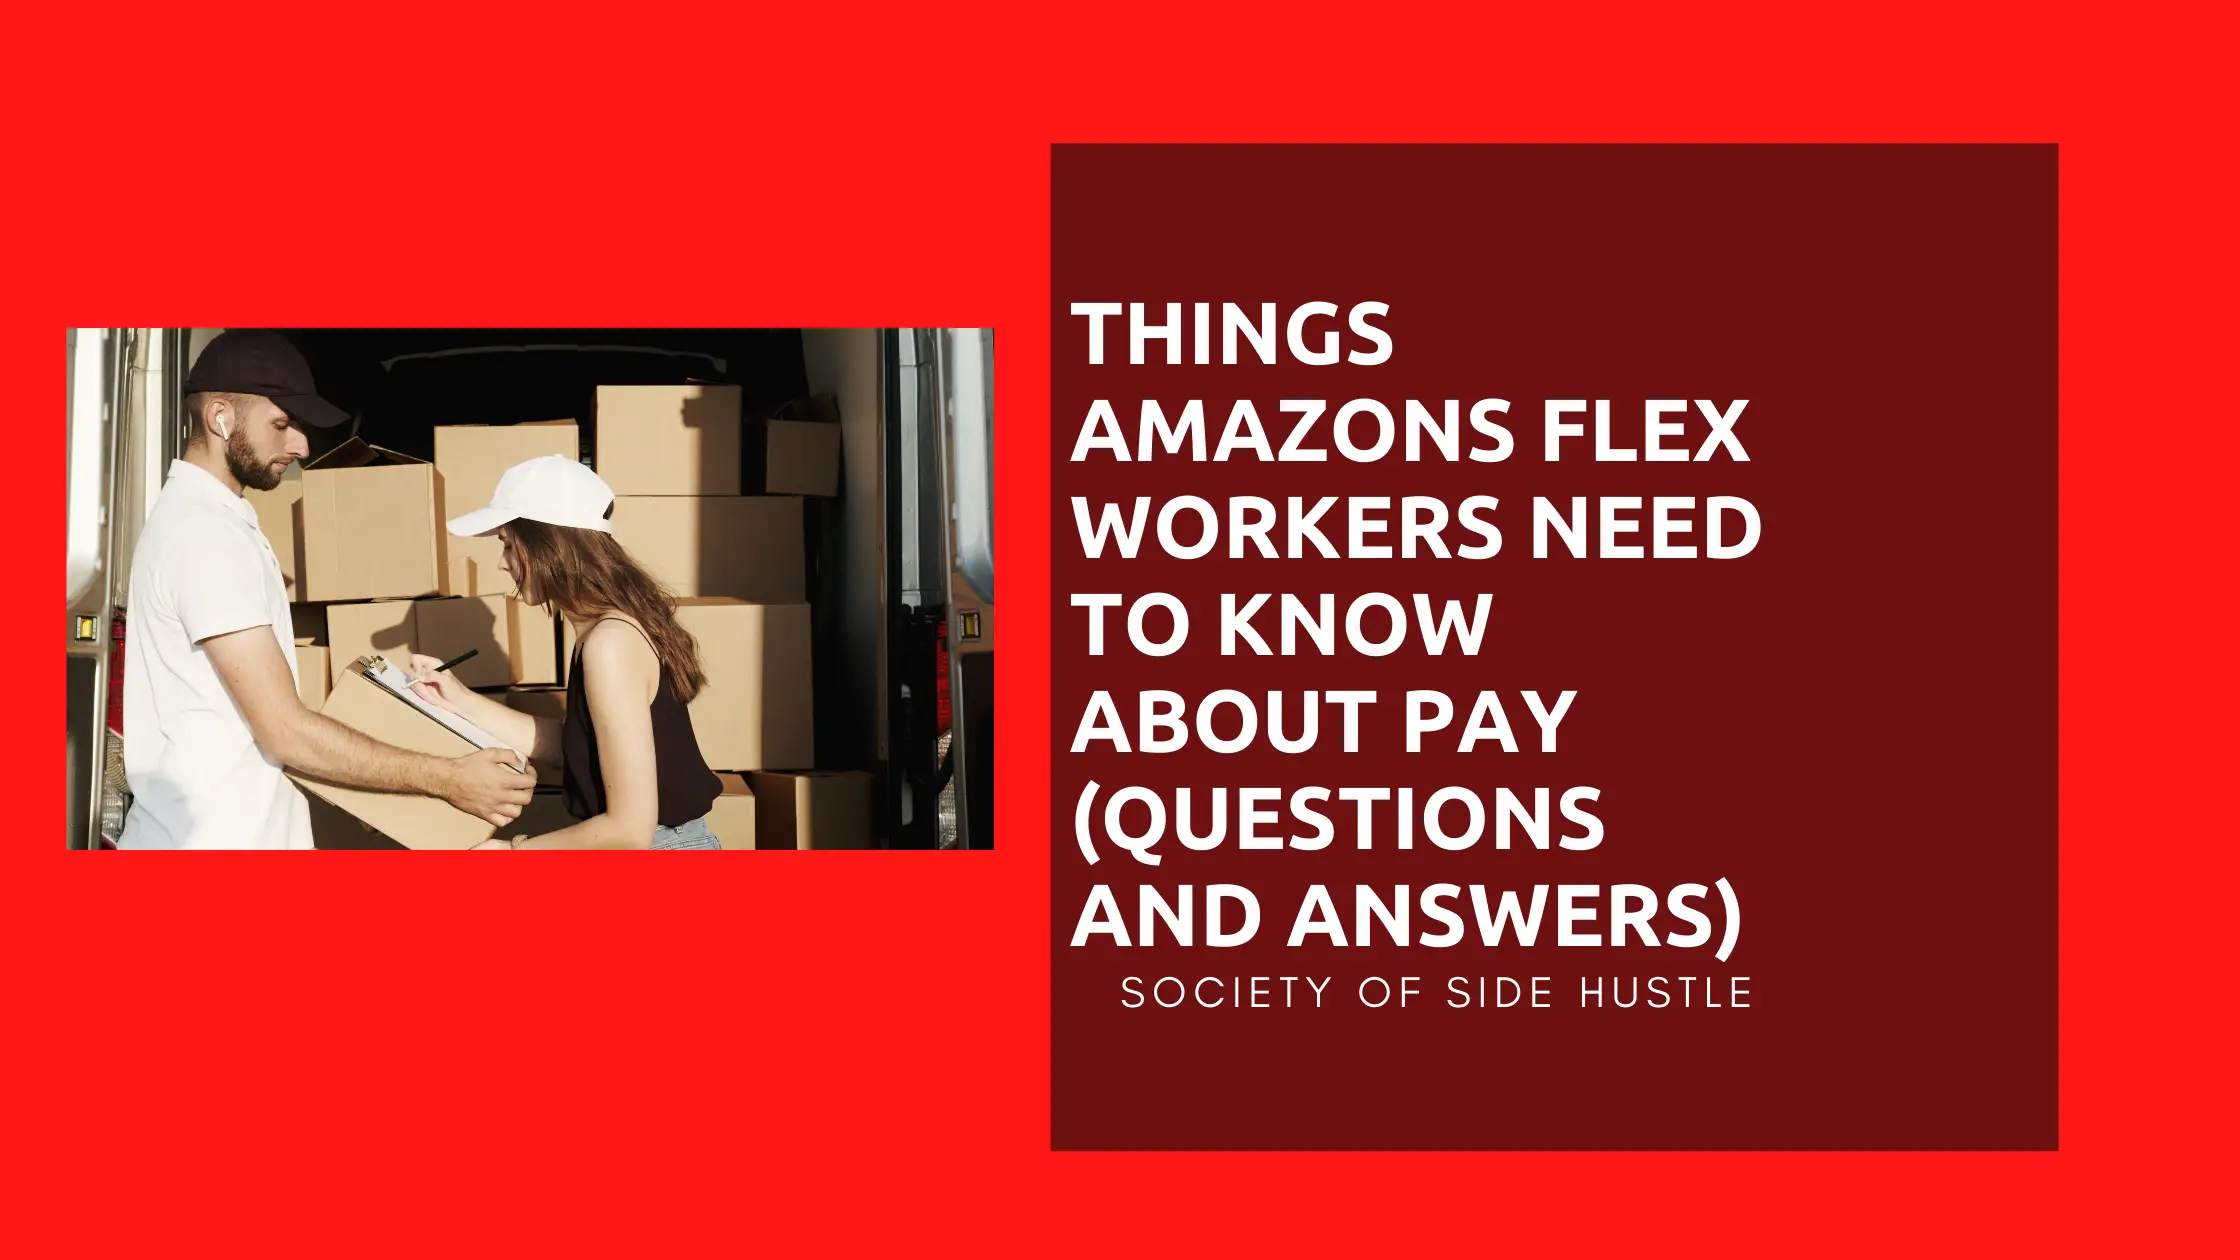 Things Amazons Flex Workers Need to Know About Pay (Questions and Answers)